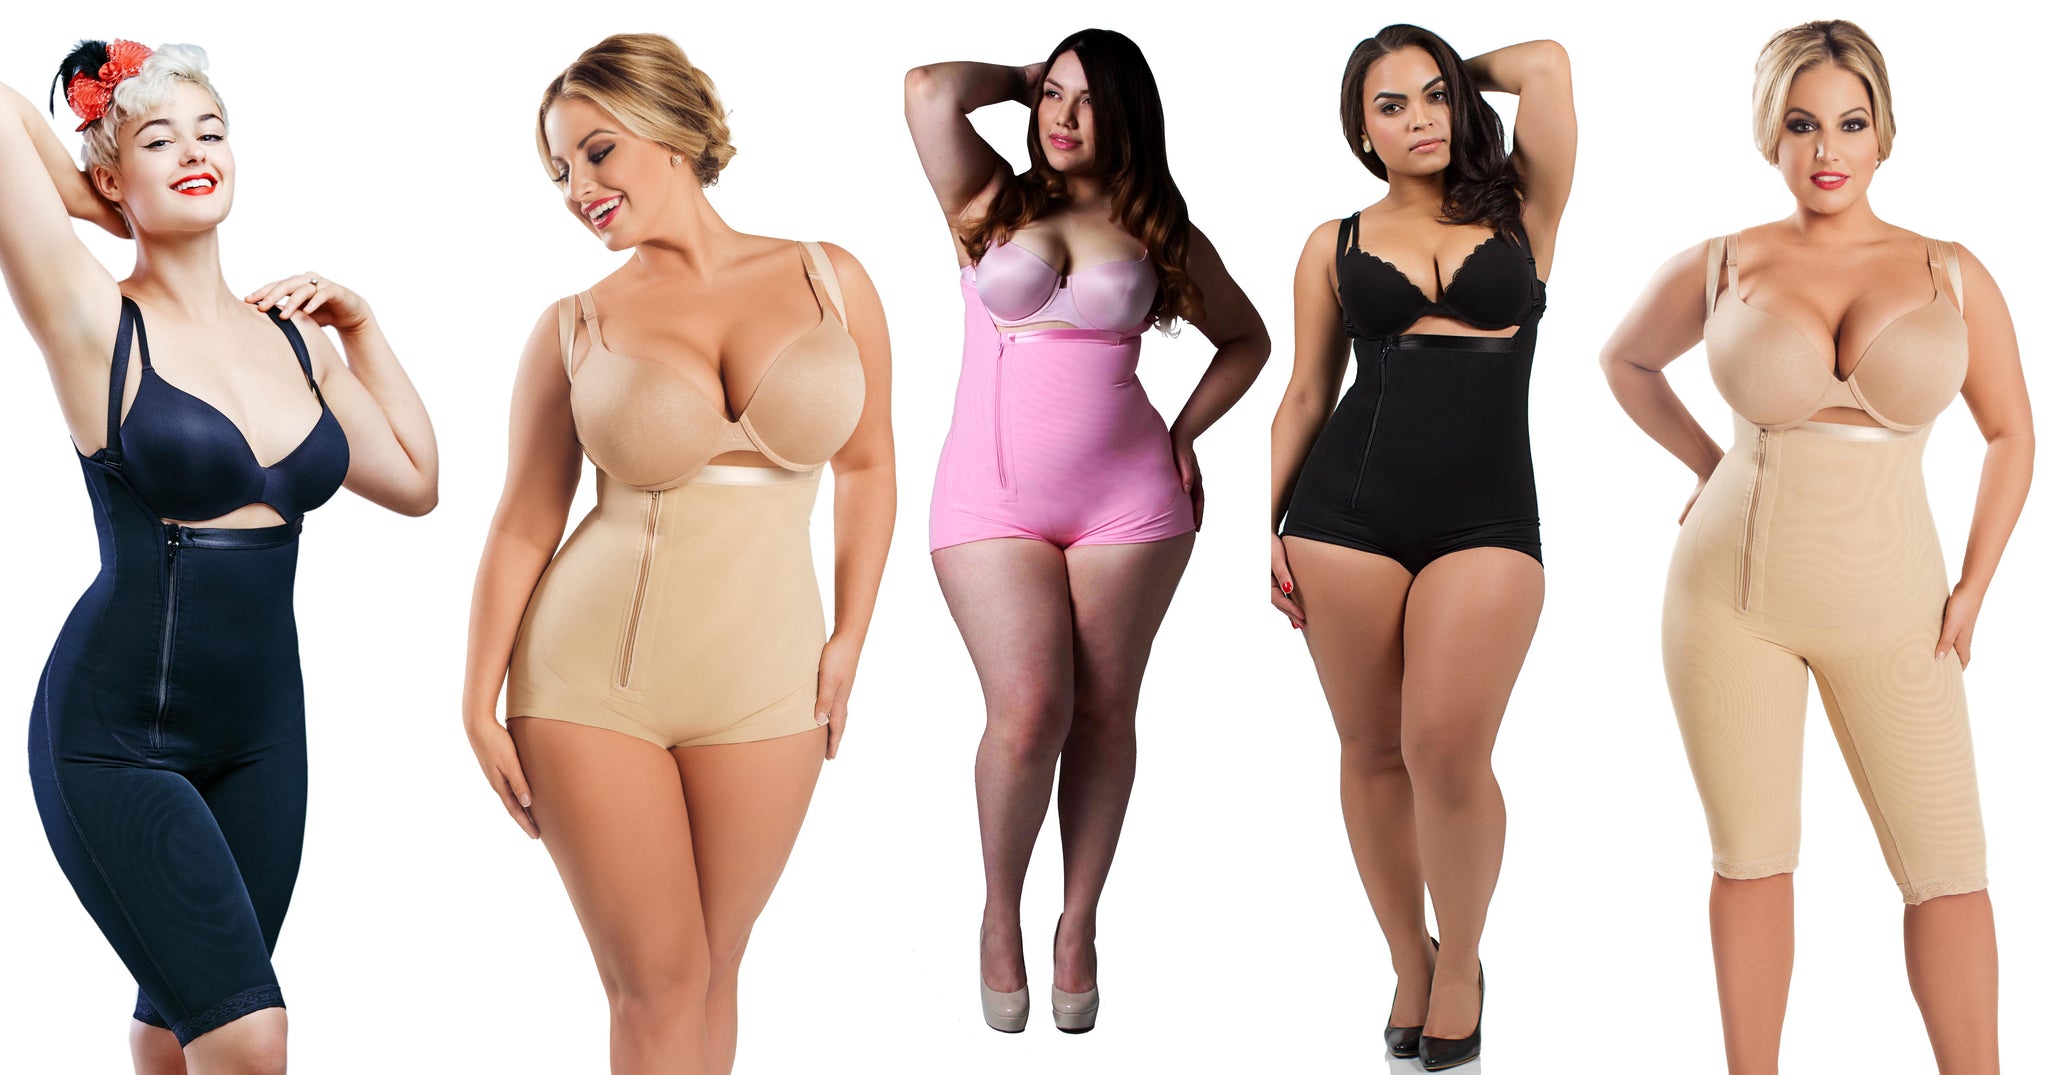 The fashion industry has historically not catered to women who are plus size. At Diva’s Curves, we think it’s high time for women of all shapes and sizes to embrace their curves and feel comfortable in their shapewear garments. Diva’s Curves is a shapewear company that focuses on creating undergarments that cater to the plus size female physique. We know plus size women, because we are plus size women. That’s right, Diva’s Curves was created by women who were personally fed up with the complete lack of options in the undergarment industry. Our sole mission is to design products that allow women of all sizes to look and feel amazing, both on the inside and the out. We do this all while maintaining your body’s naturally appealing silhouette. Our shapewear is strategically engineered to compress, mold, and smooth your body into the sexy, sleek figure you’ve always dreamed of. Just because you aren’t a size two doesn’t mean you can’t look great in everything you wear. As plus size women ourselves, we understand the struggle. We’ve been the ones in the dressing room trying to squeeze into shapewear that was clearly not designed for a fuller physique. We’ve felt the frustration of feeling like our curves are holding us back from feeling sexy and confident because the market is saturated with shapewear designed for the ultra-slim. Instead of wallowing in our frustration, we decided to take action. Why shouldn’t plus size women have undergarments that smooth and shape their bodies without feeling bulky or uncomfortable? We knew that being plus sized ourselves gave us a unique advantage. We know what works on a curvy frame, we know what’s comfortable, and we want to share that knowledge with all the women out there who are suffering from a lack of quality shapewear that was designed with them in mind. If you’re searching for plus size shapewear compression that’s designed to flatten your tummy, smooth your love handles, give your bust a boost, and lift your bottom, we’ve got you covered! Diva’s Curves offers the best plus size shapewear on the market. No more agonizing over every lump and bump each time you want to wear a tight-fitting dress or fitted pair of jeans. Stop trying to squeeze yourself into shapewear that doesn’t highlight and compliment your body type. It’s time that plus size women own their curves and that means having shapewear that smooths and accentuates in all the right places while maintaining maximum comfort.